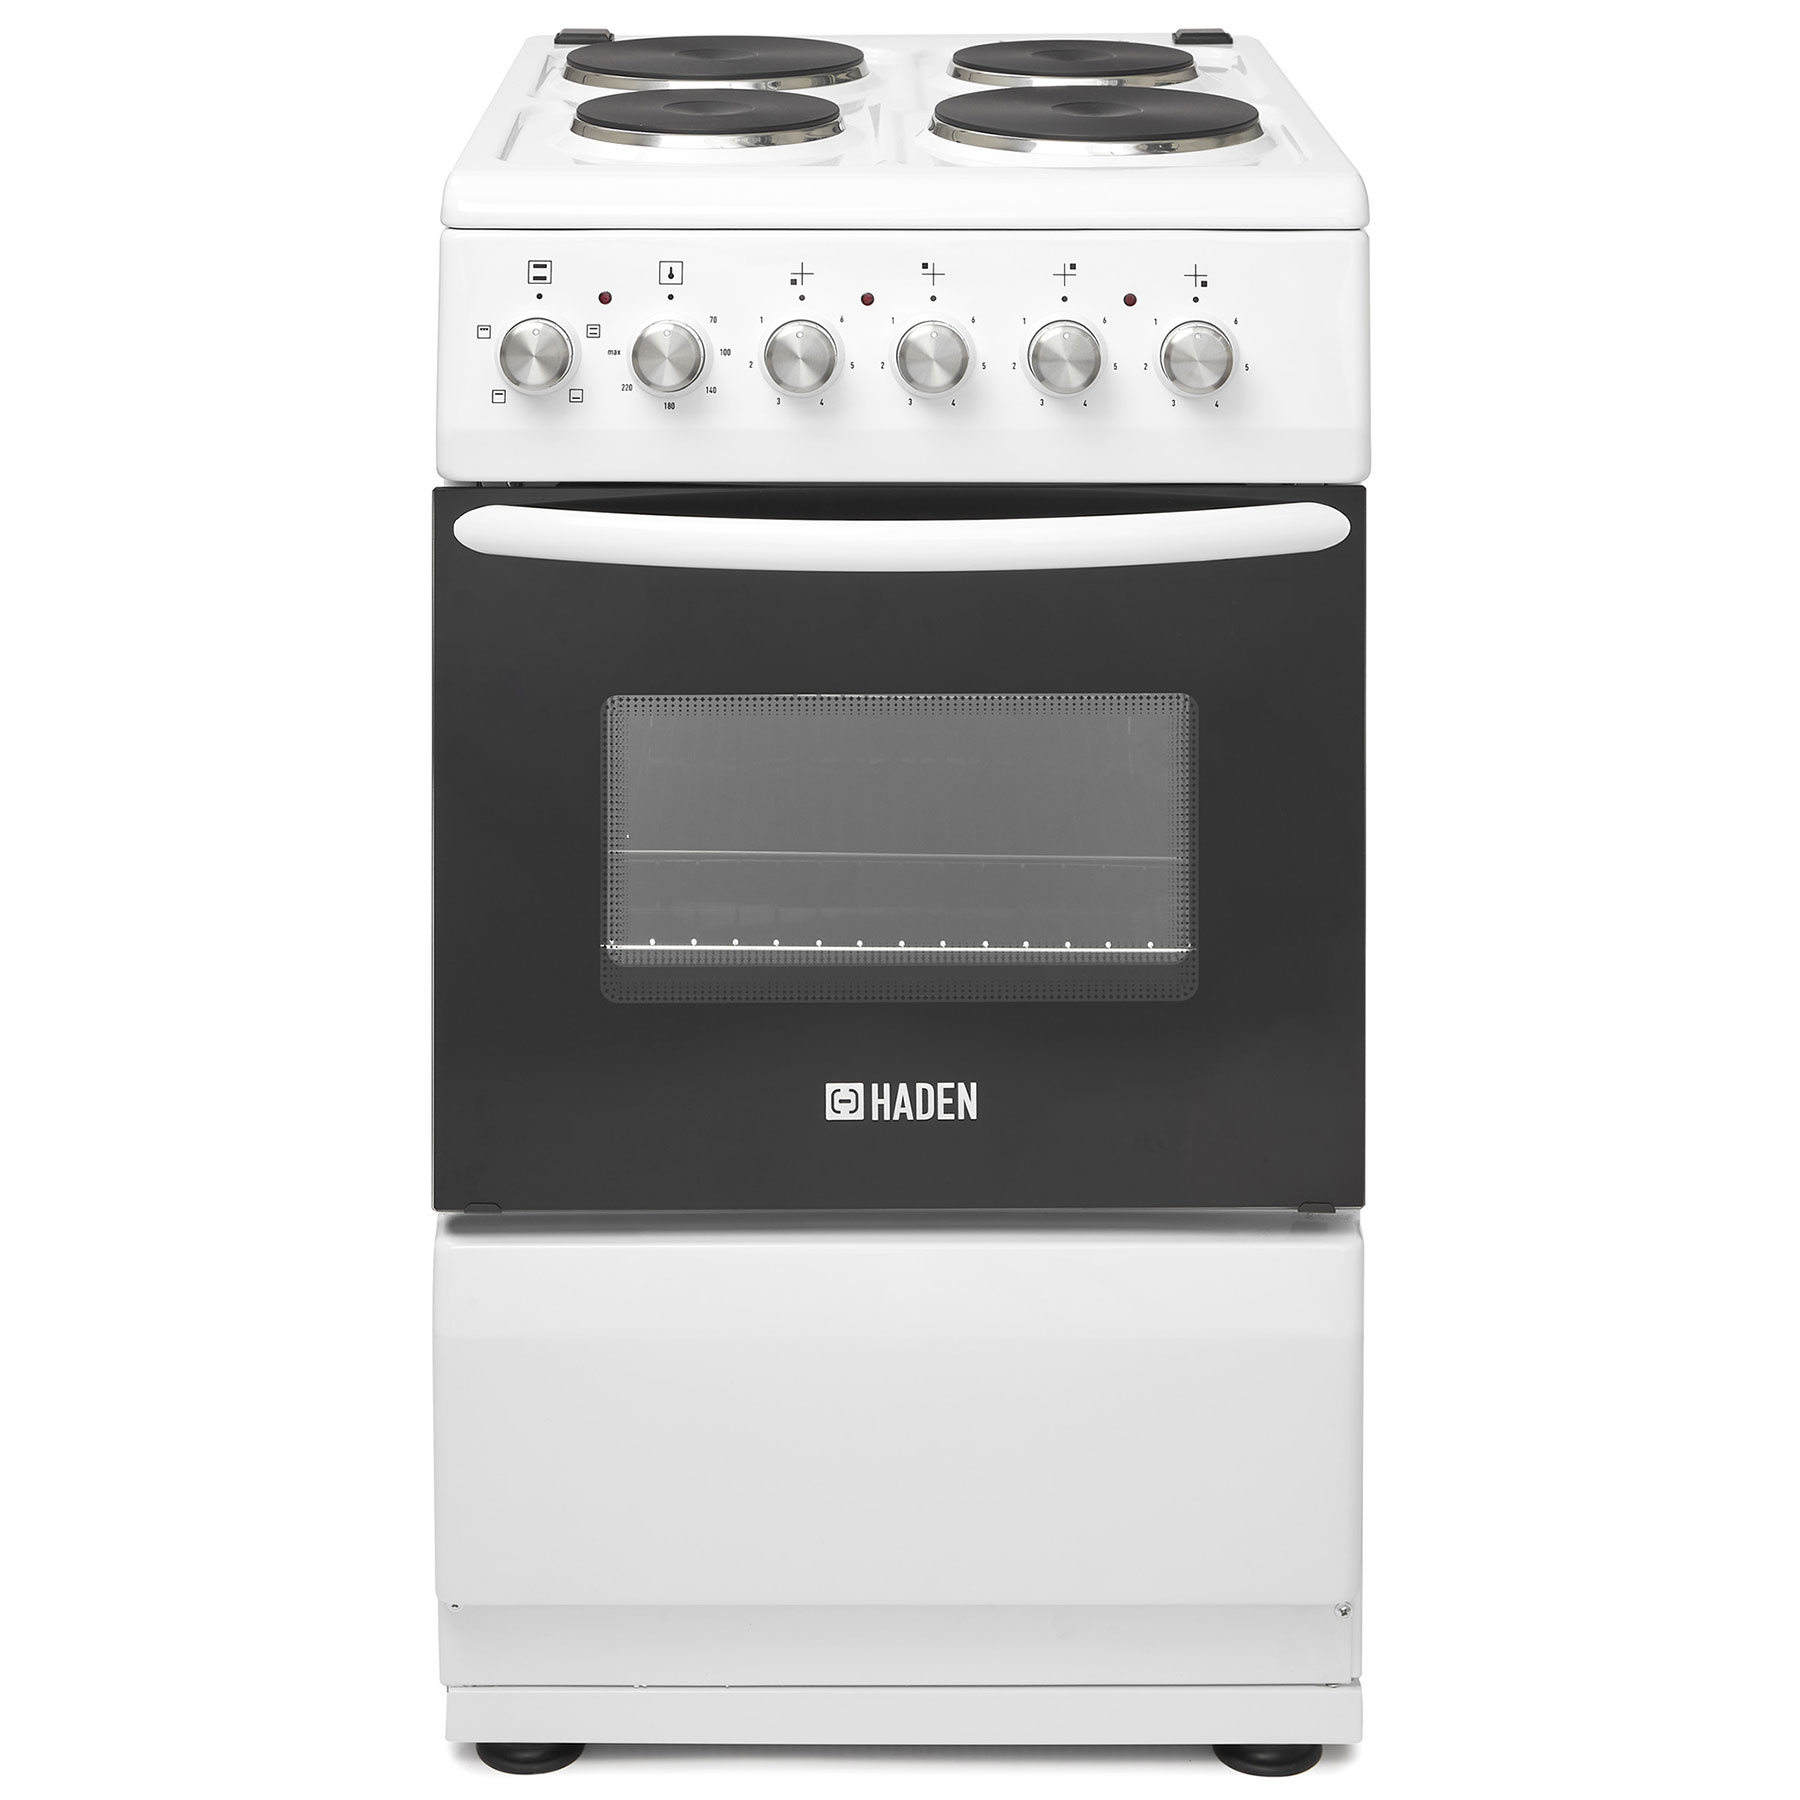 Image of Haden HES050W 50cm Single Oven Electric Cooker in White Solid Plate